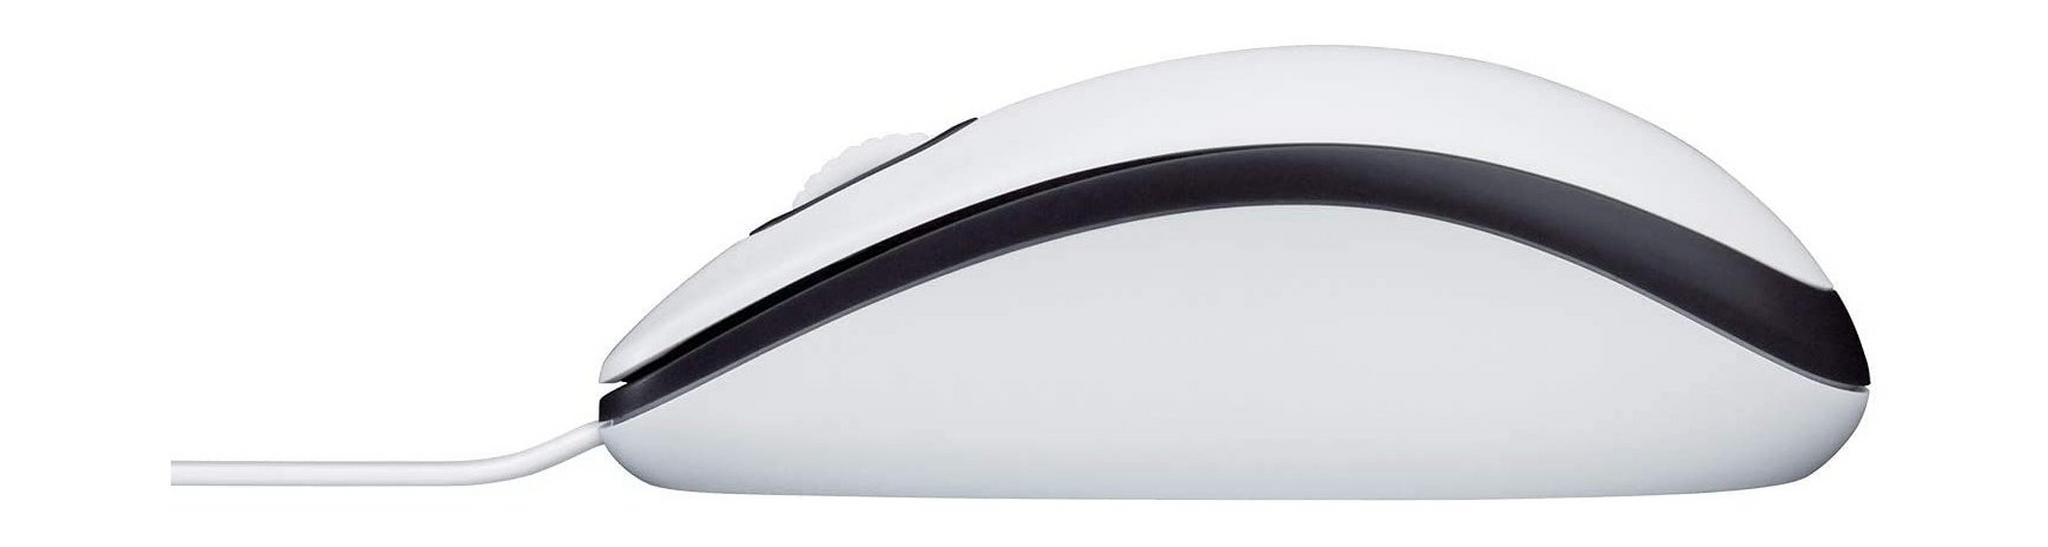 Logitech M100 USB Wired Mouse - Clamshell